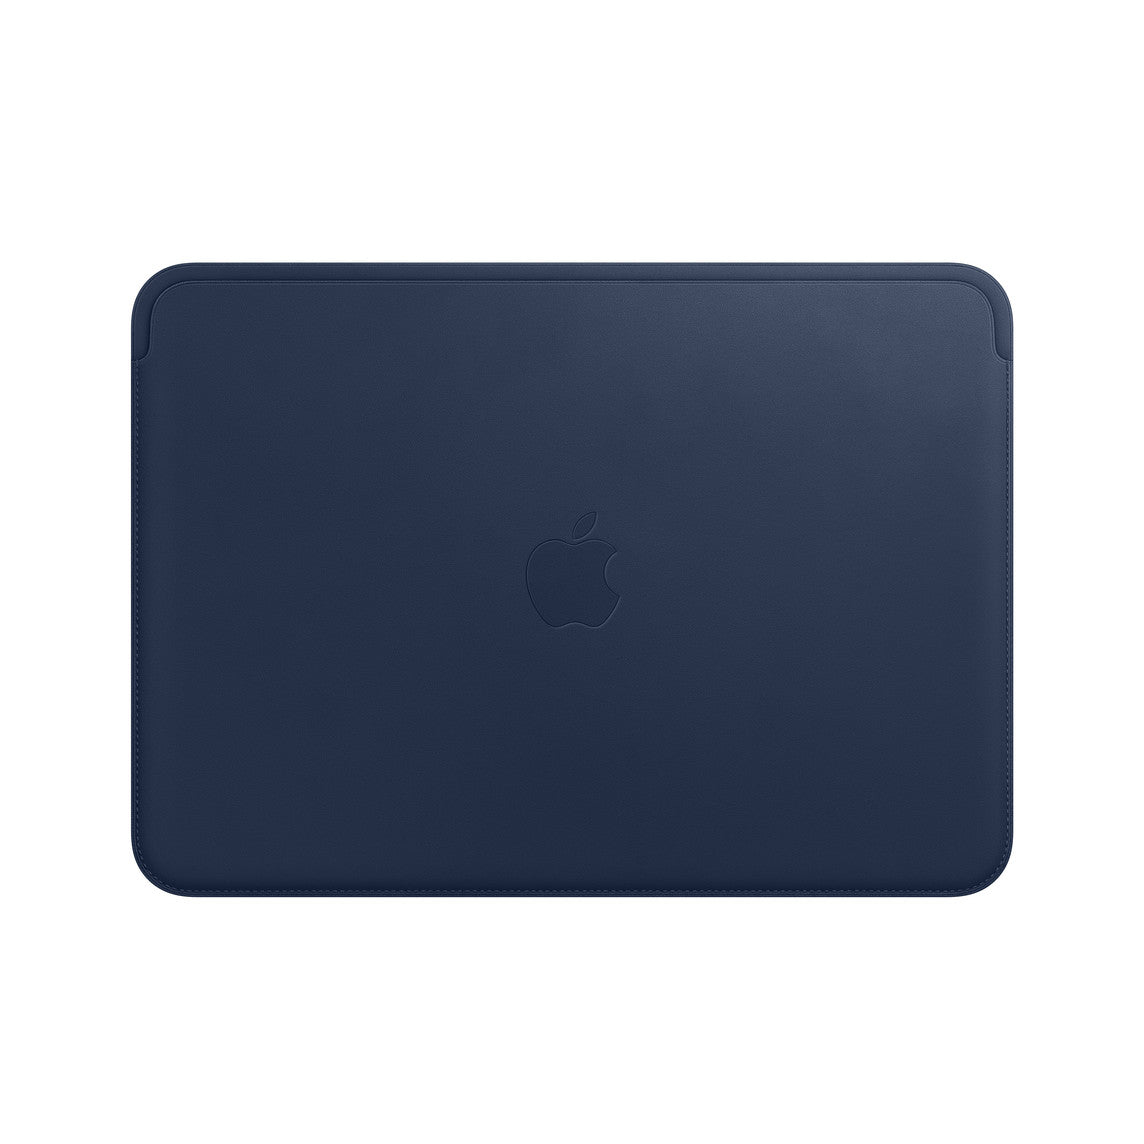 Apple MacBook Air and Pro 13in Leather Sleeve - Midnight Blue Midnight Blue New - Sealed